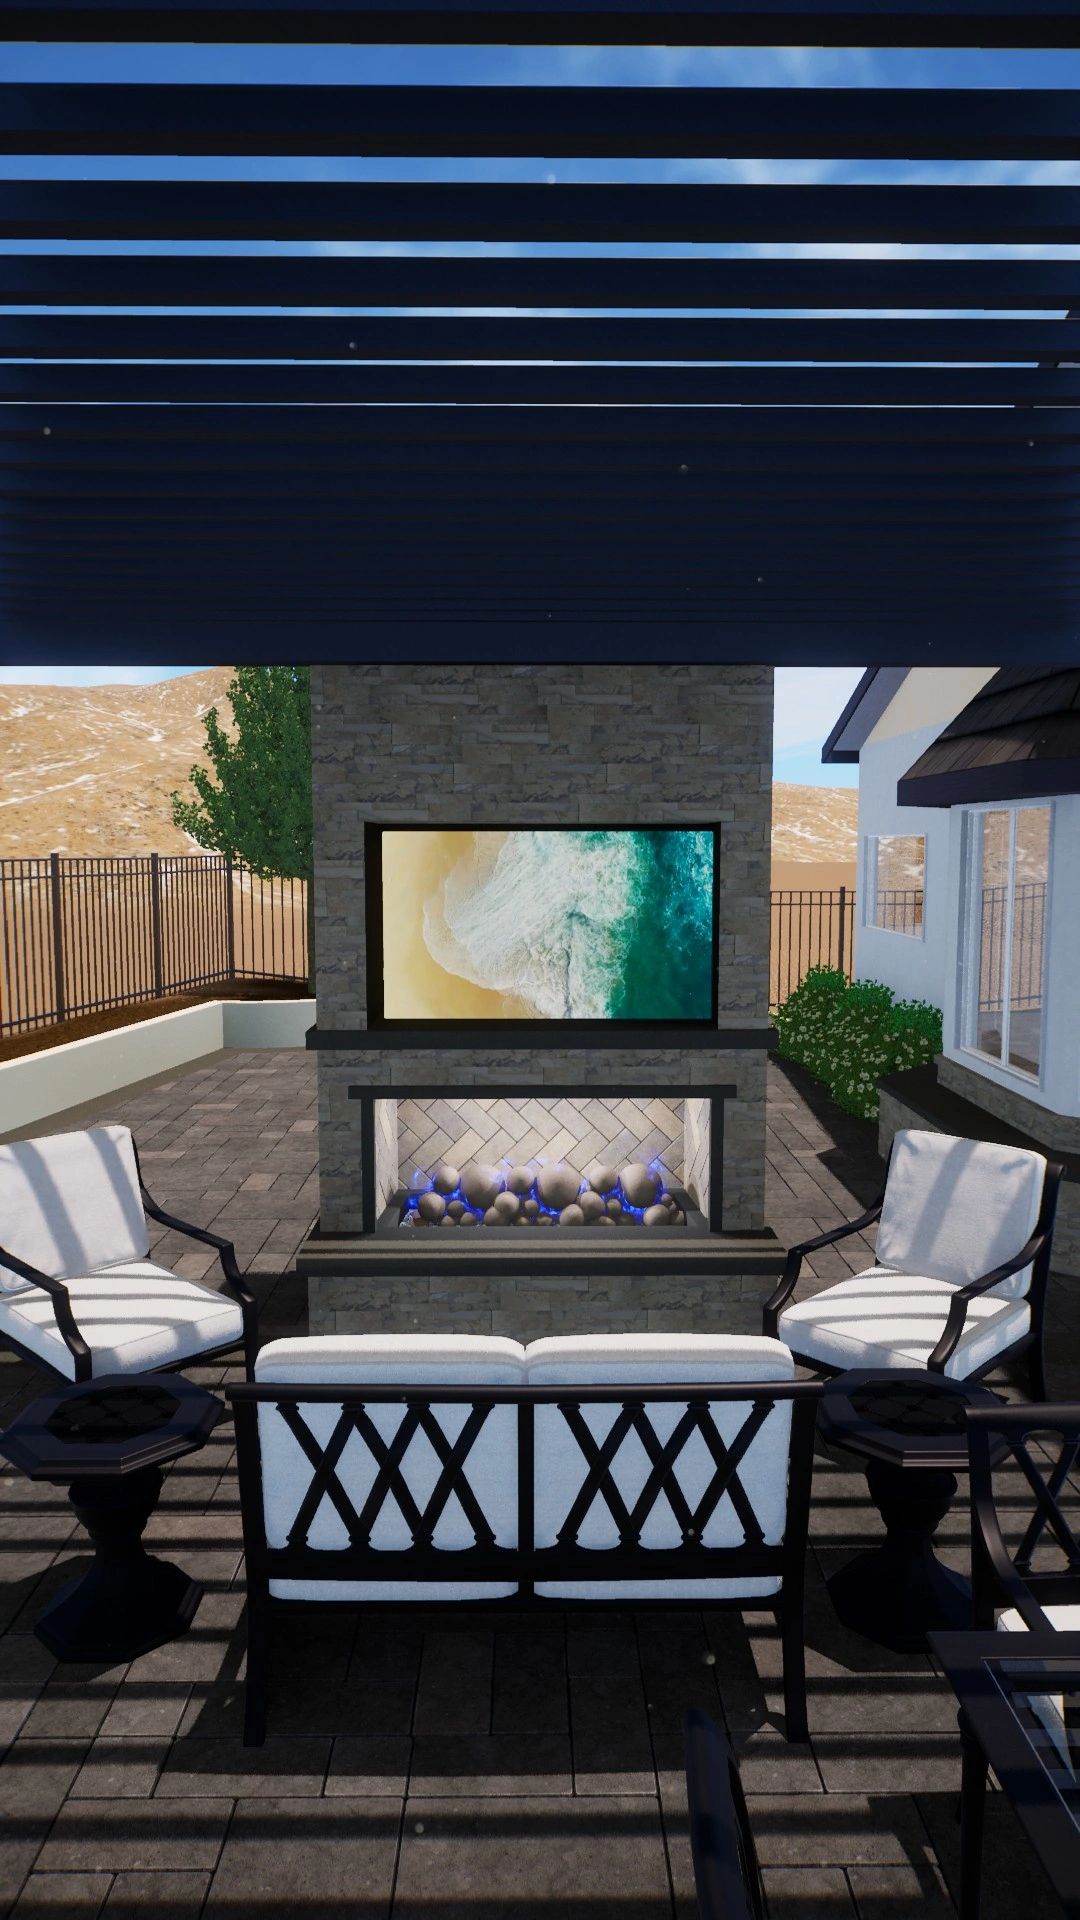 Outdoor fireplace and entertainment center with interlocking paver patio.